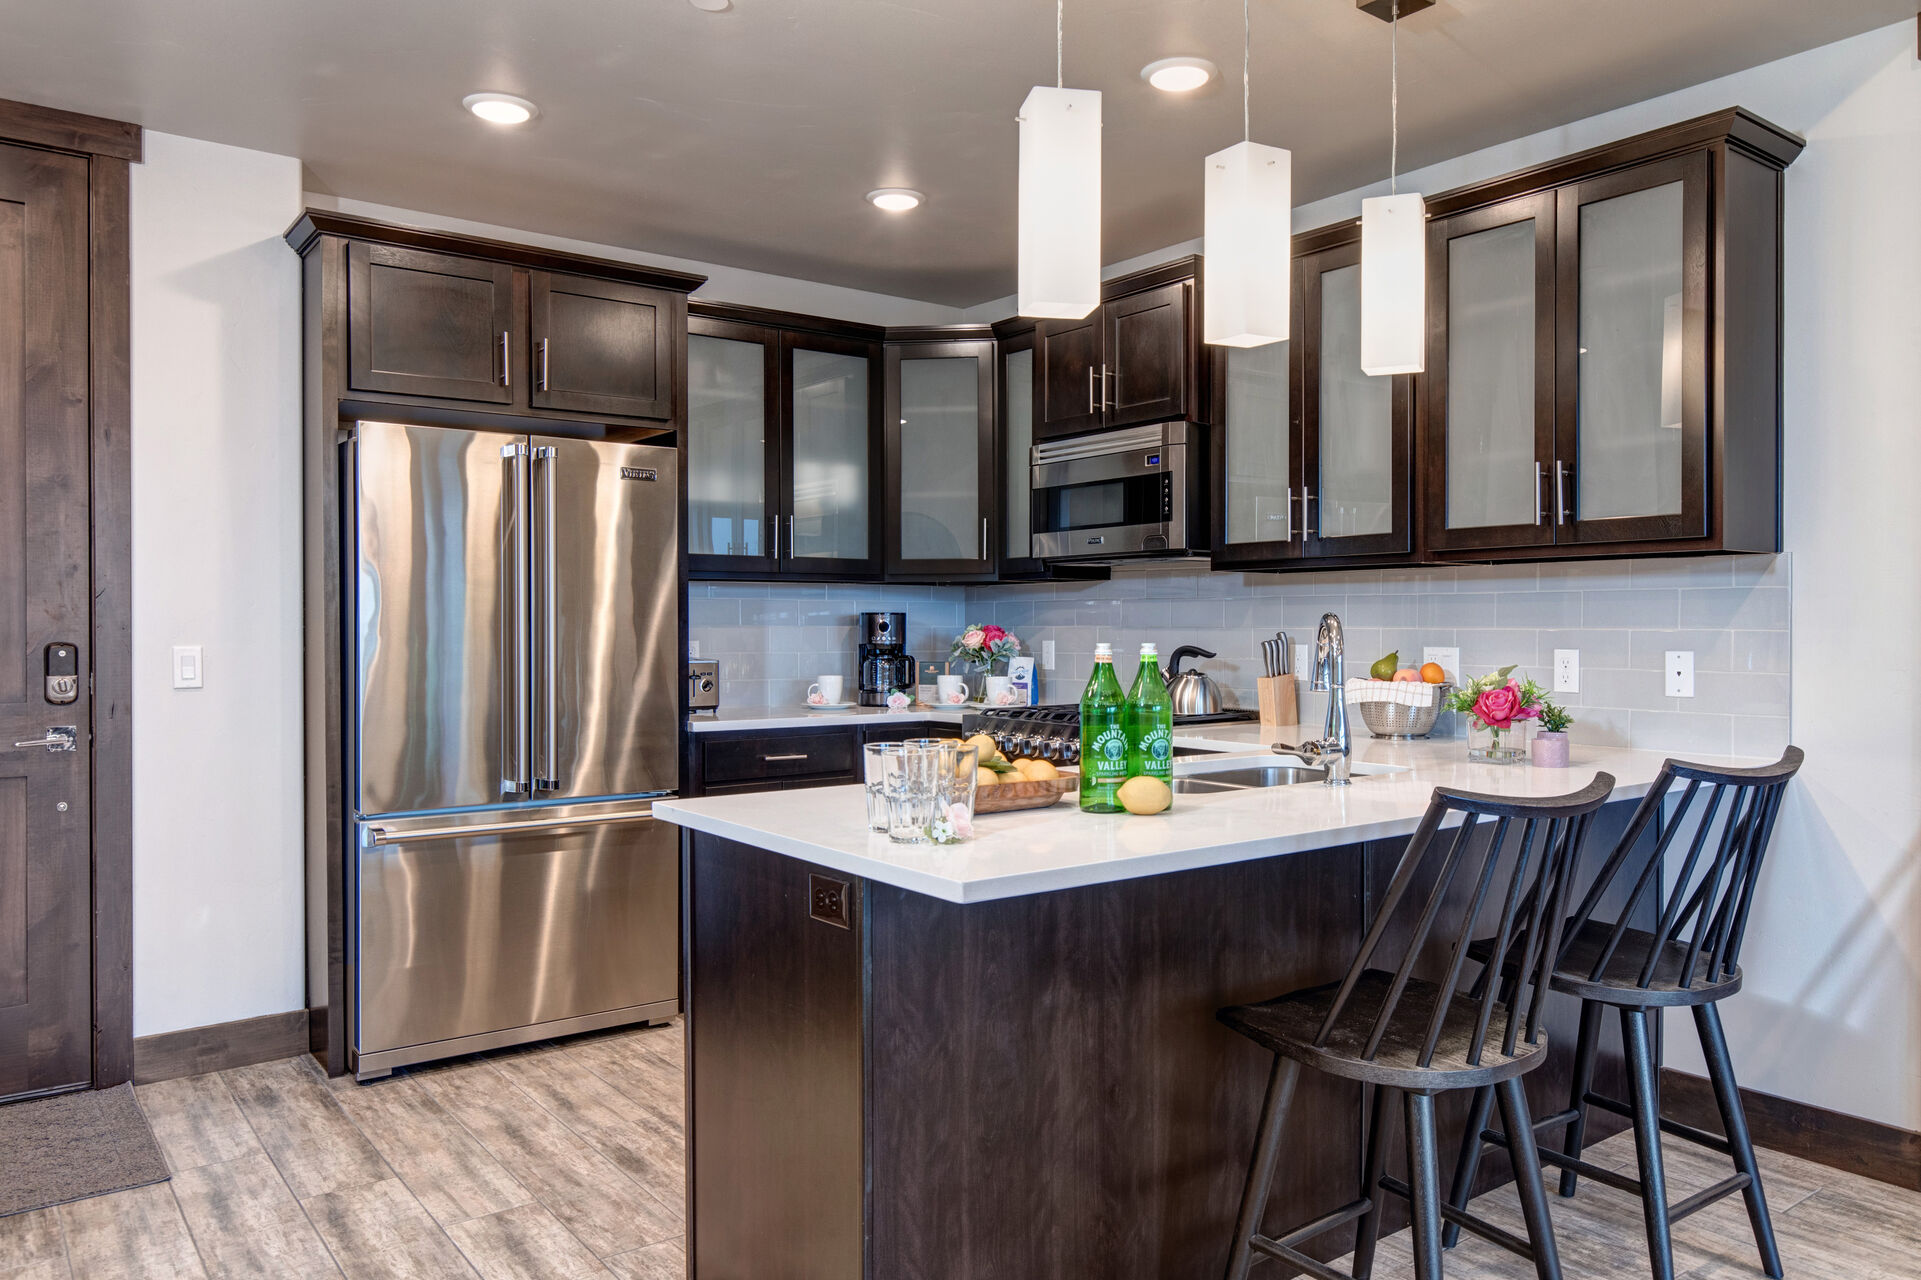 Fully equipped kitchen with gorgeous stone countertops, stainless steel Viking appliances, and bar seating for two